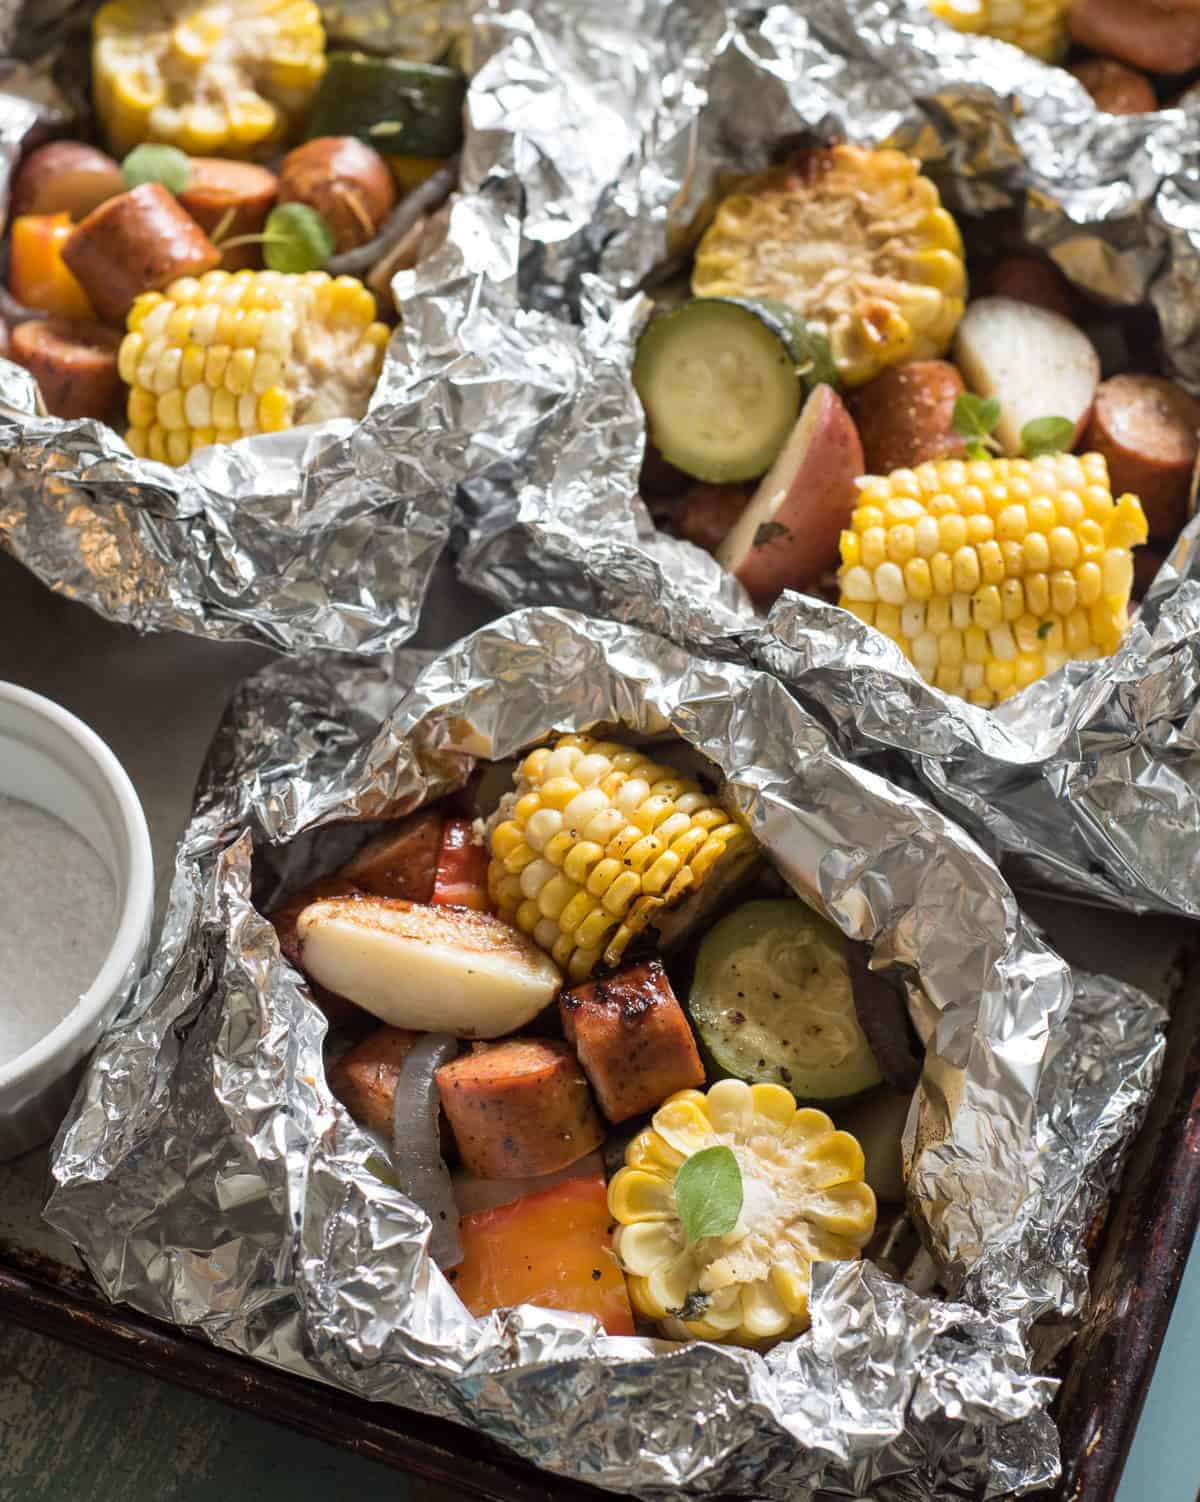 Quick and easy Sausage and Vegetable Foil Packets take about 10 minutes to put together and can be grilled, baked, or cooked over coals.